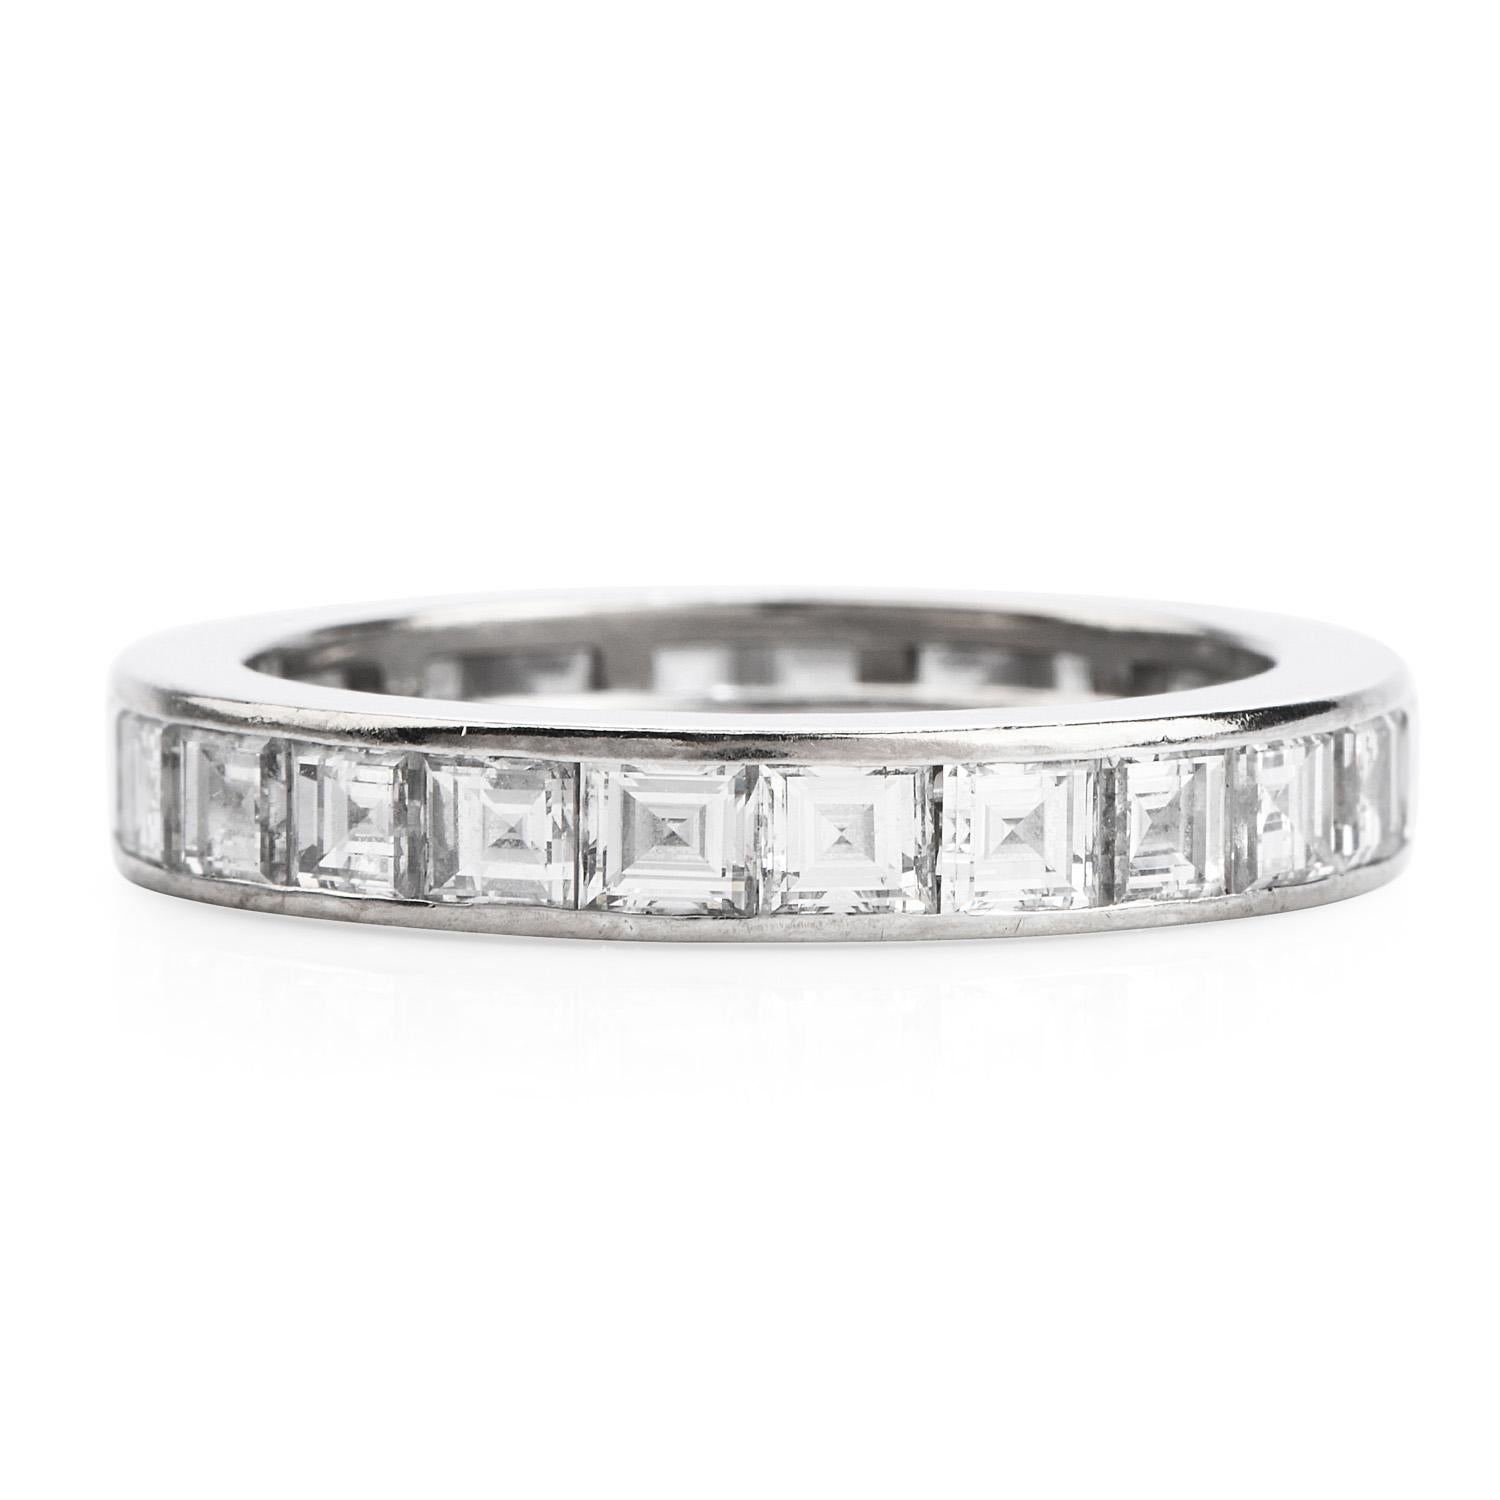 This classic Vintage Gublelin diamond band is hand crafted 18k white gold.  Weighing approx. 5.7 grams and is adorned with 24 genuine high quality Square-cut diamonds cumulatively weighing approx. 3.20 carats, graded F-G  color and VS1-VS2 clarity.